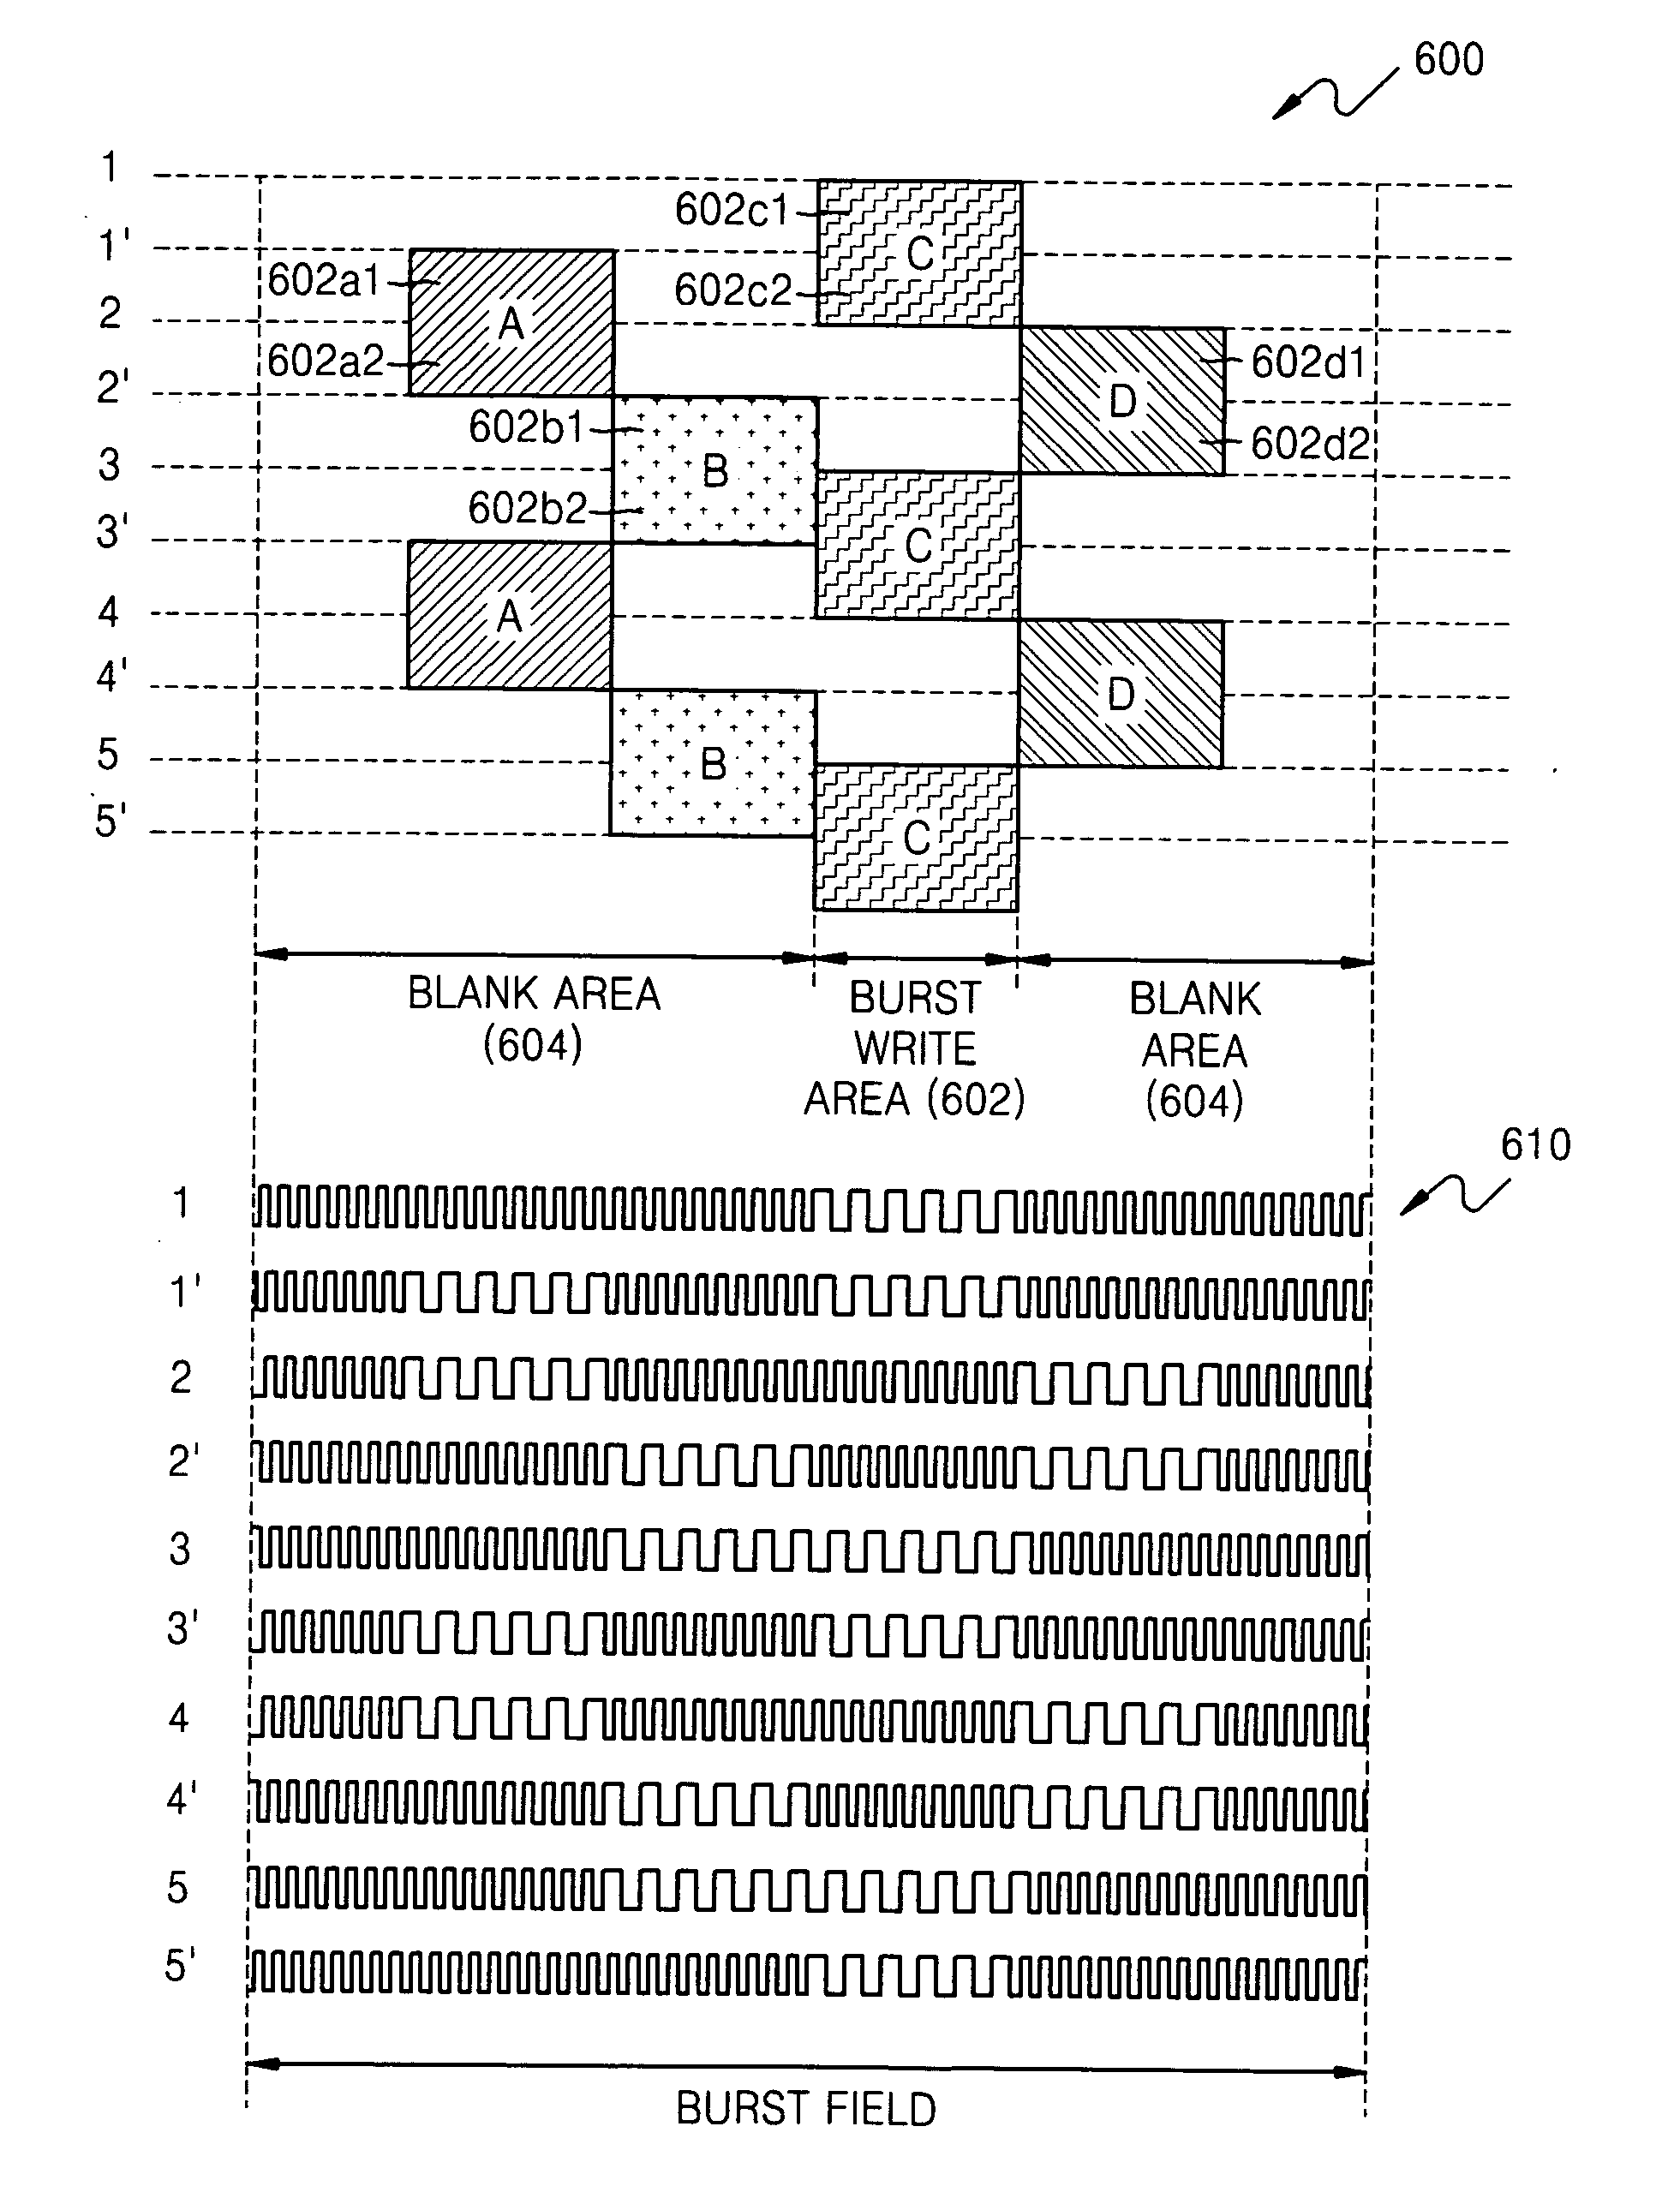 Method for recording bursts on a disk and related apparatus